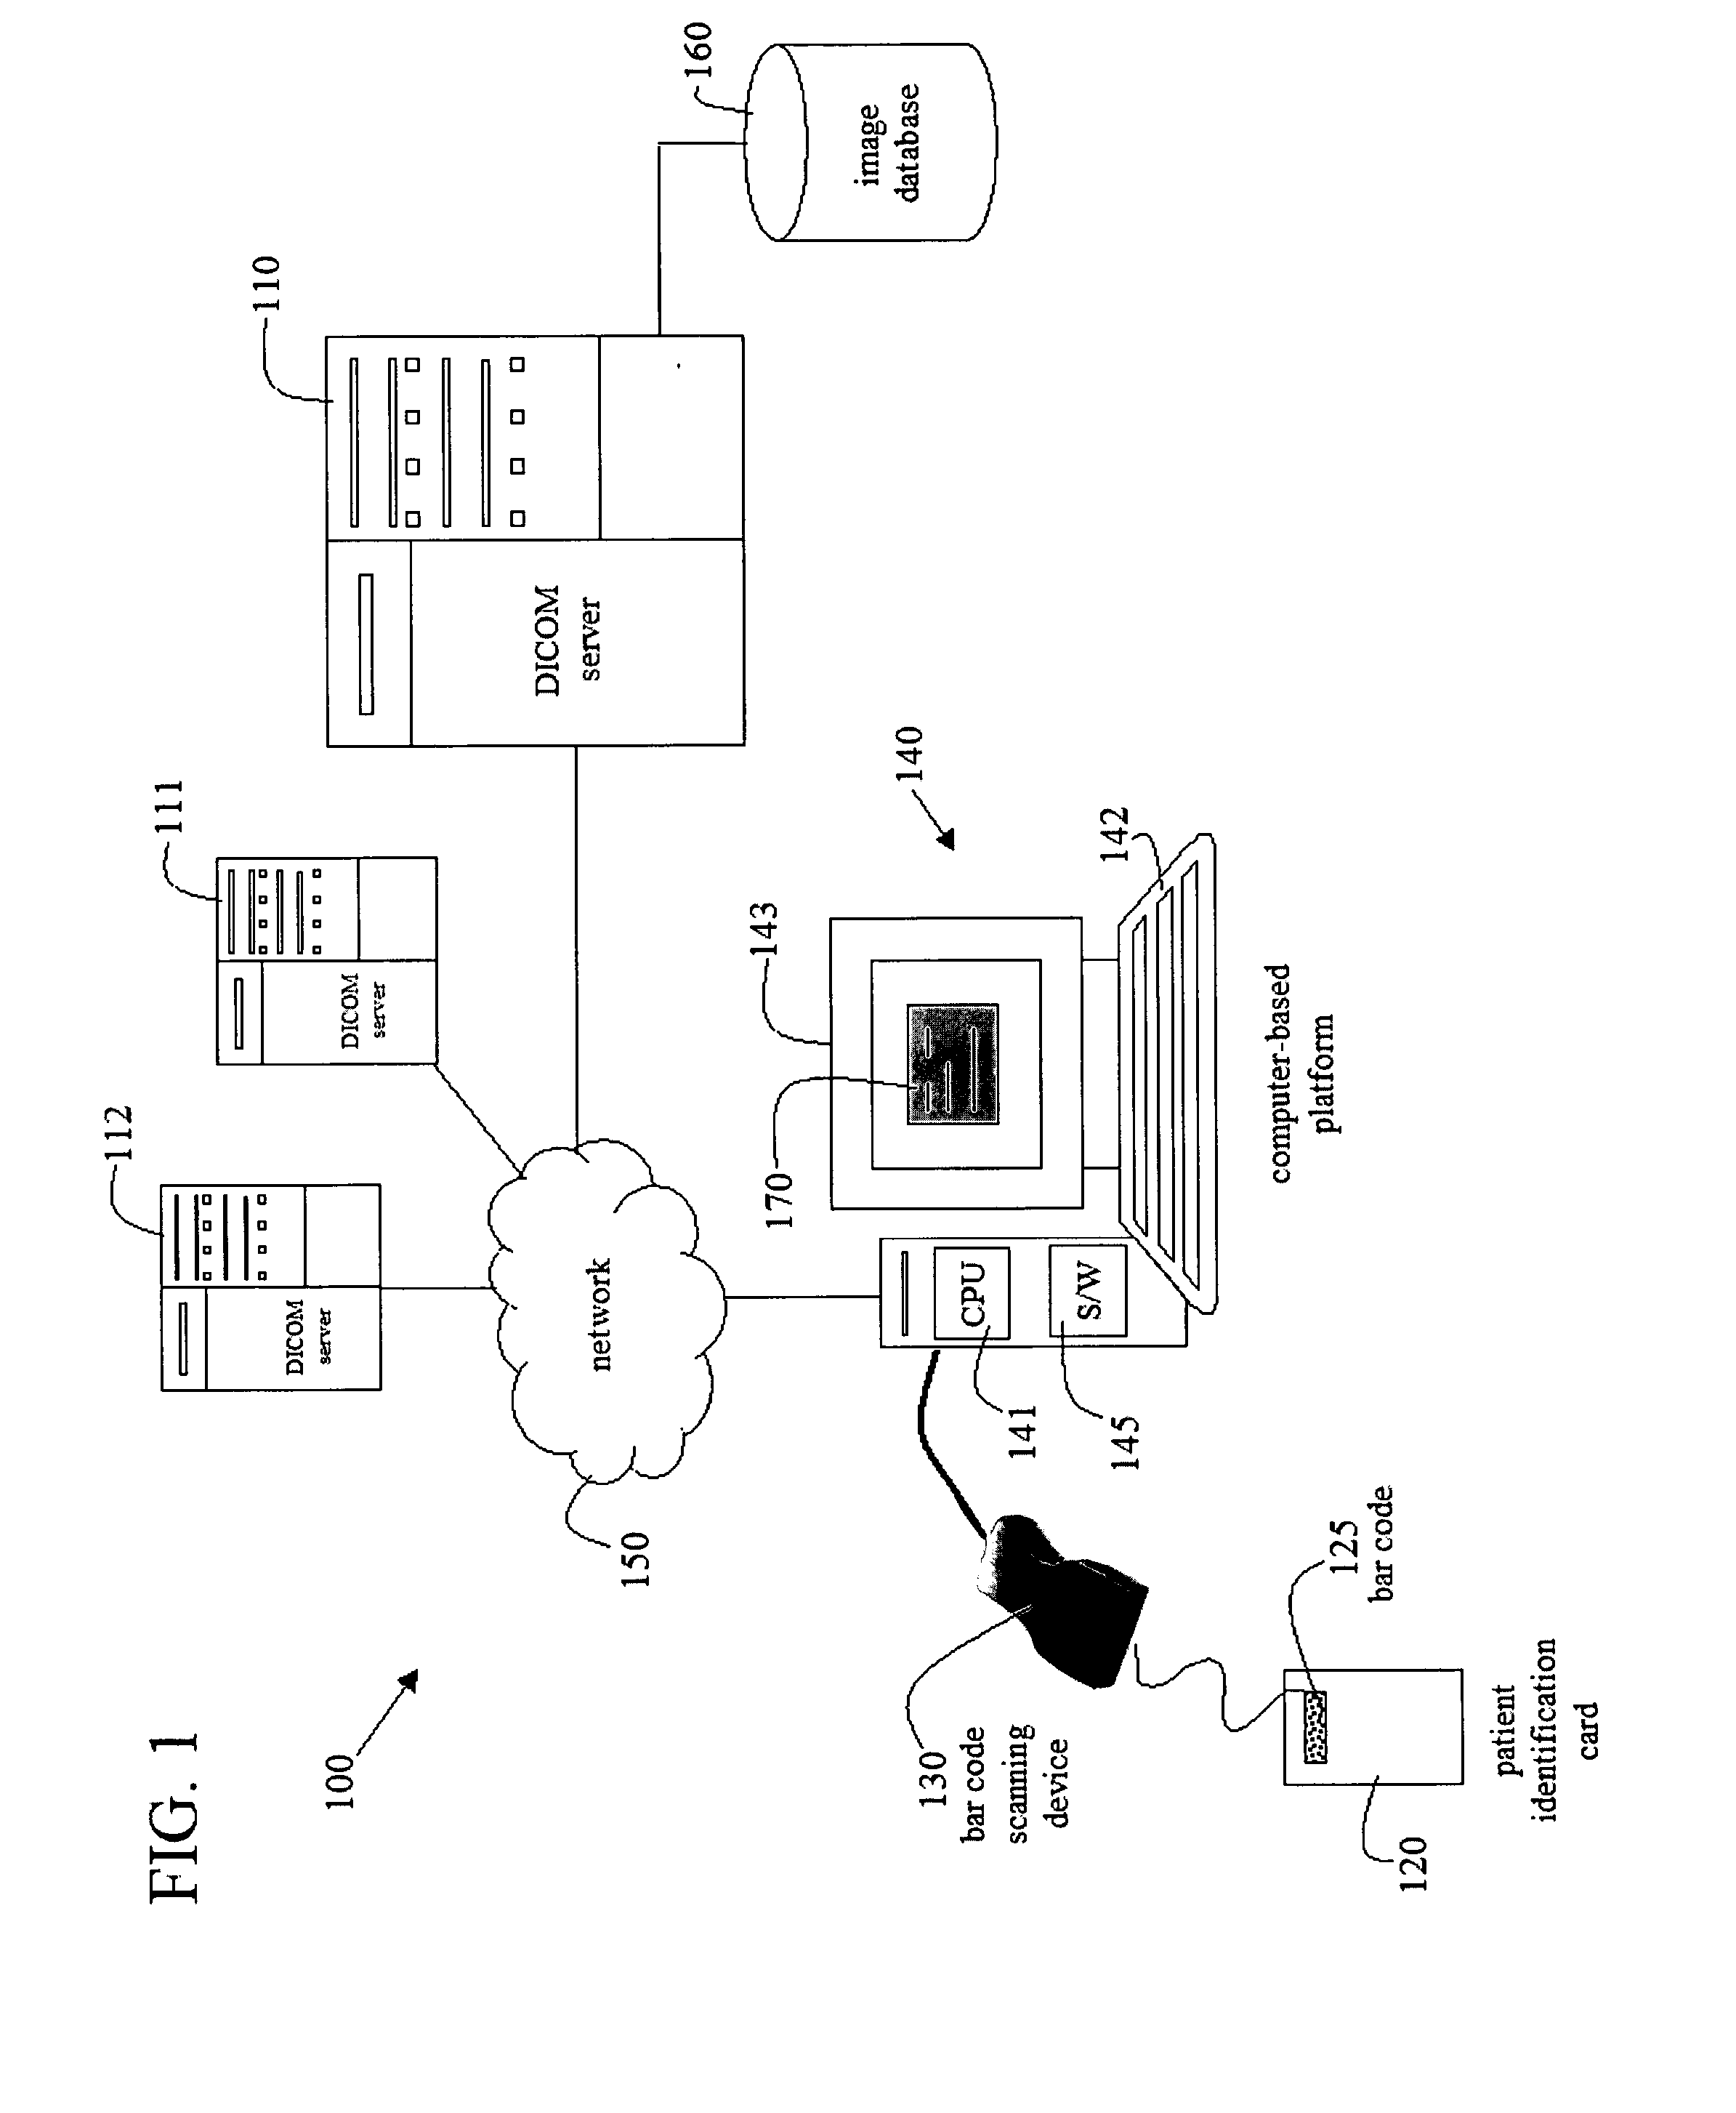 System and method for the automatic generation of a query to a DICOM server